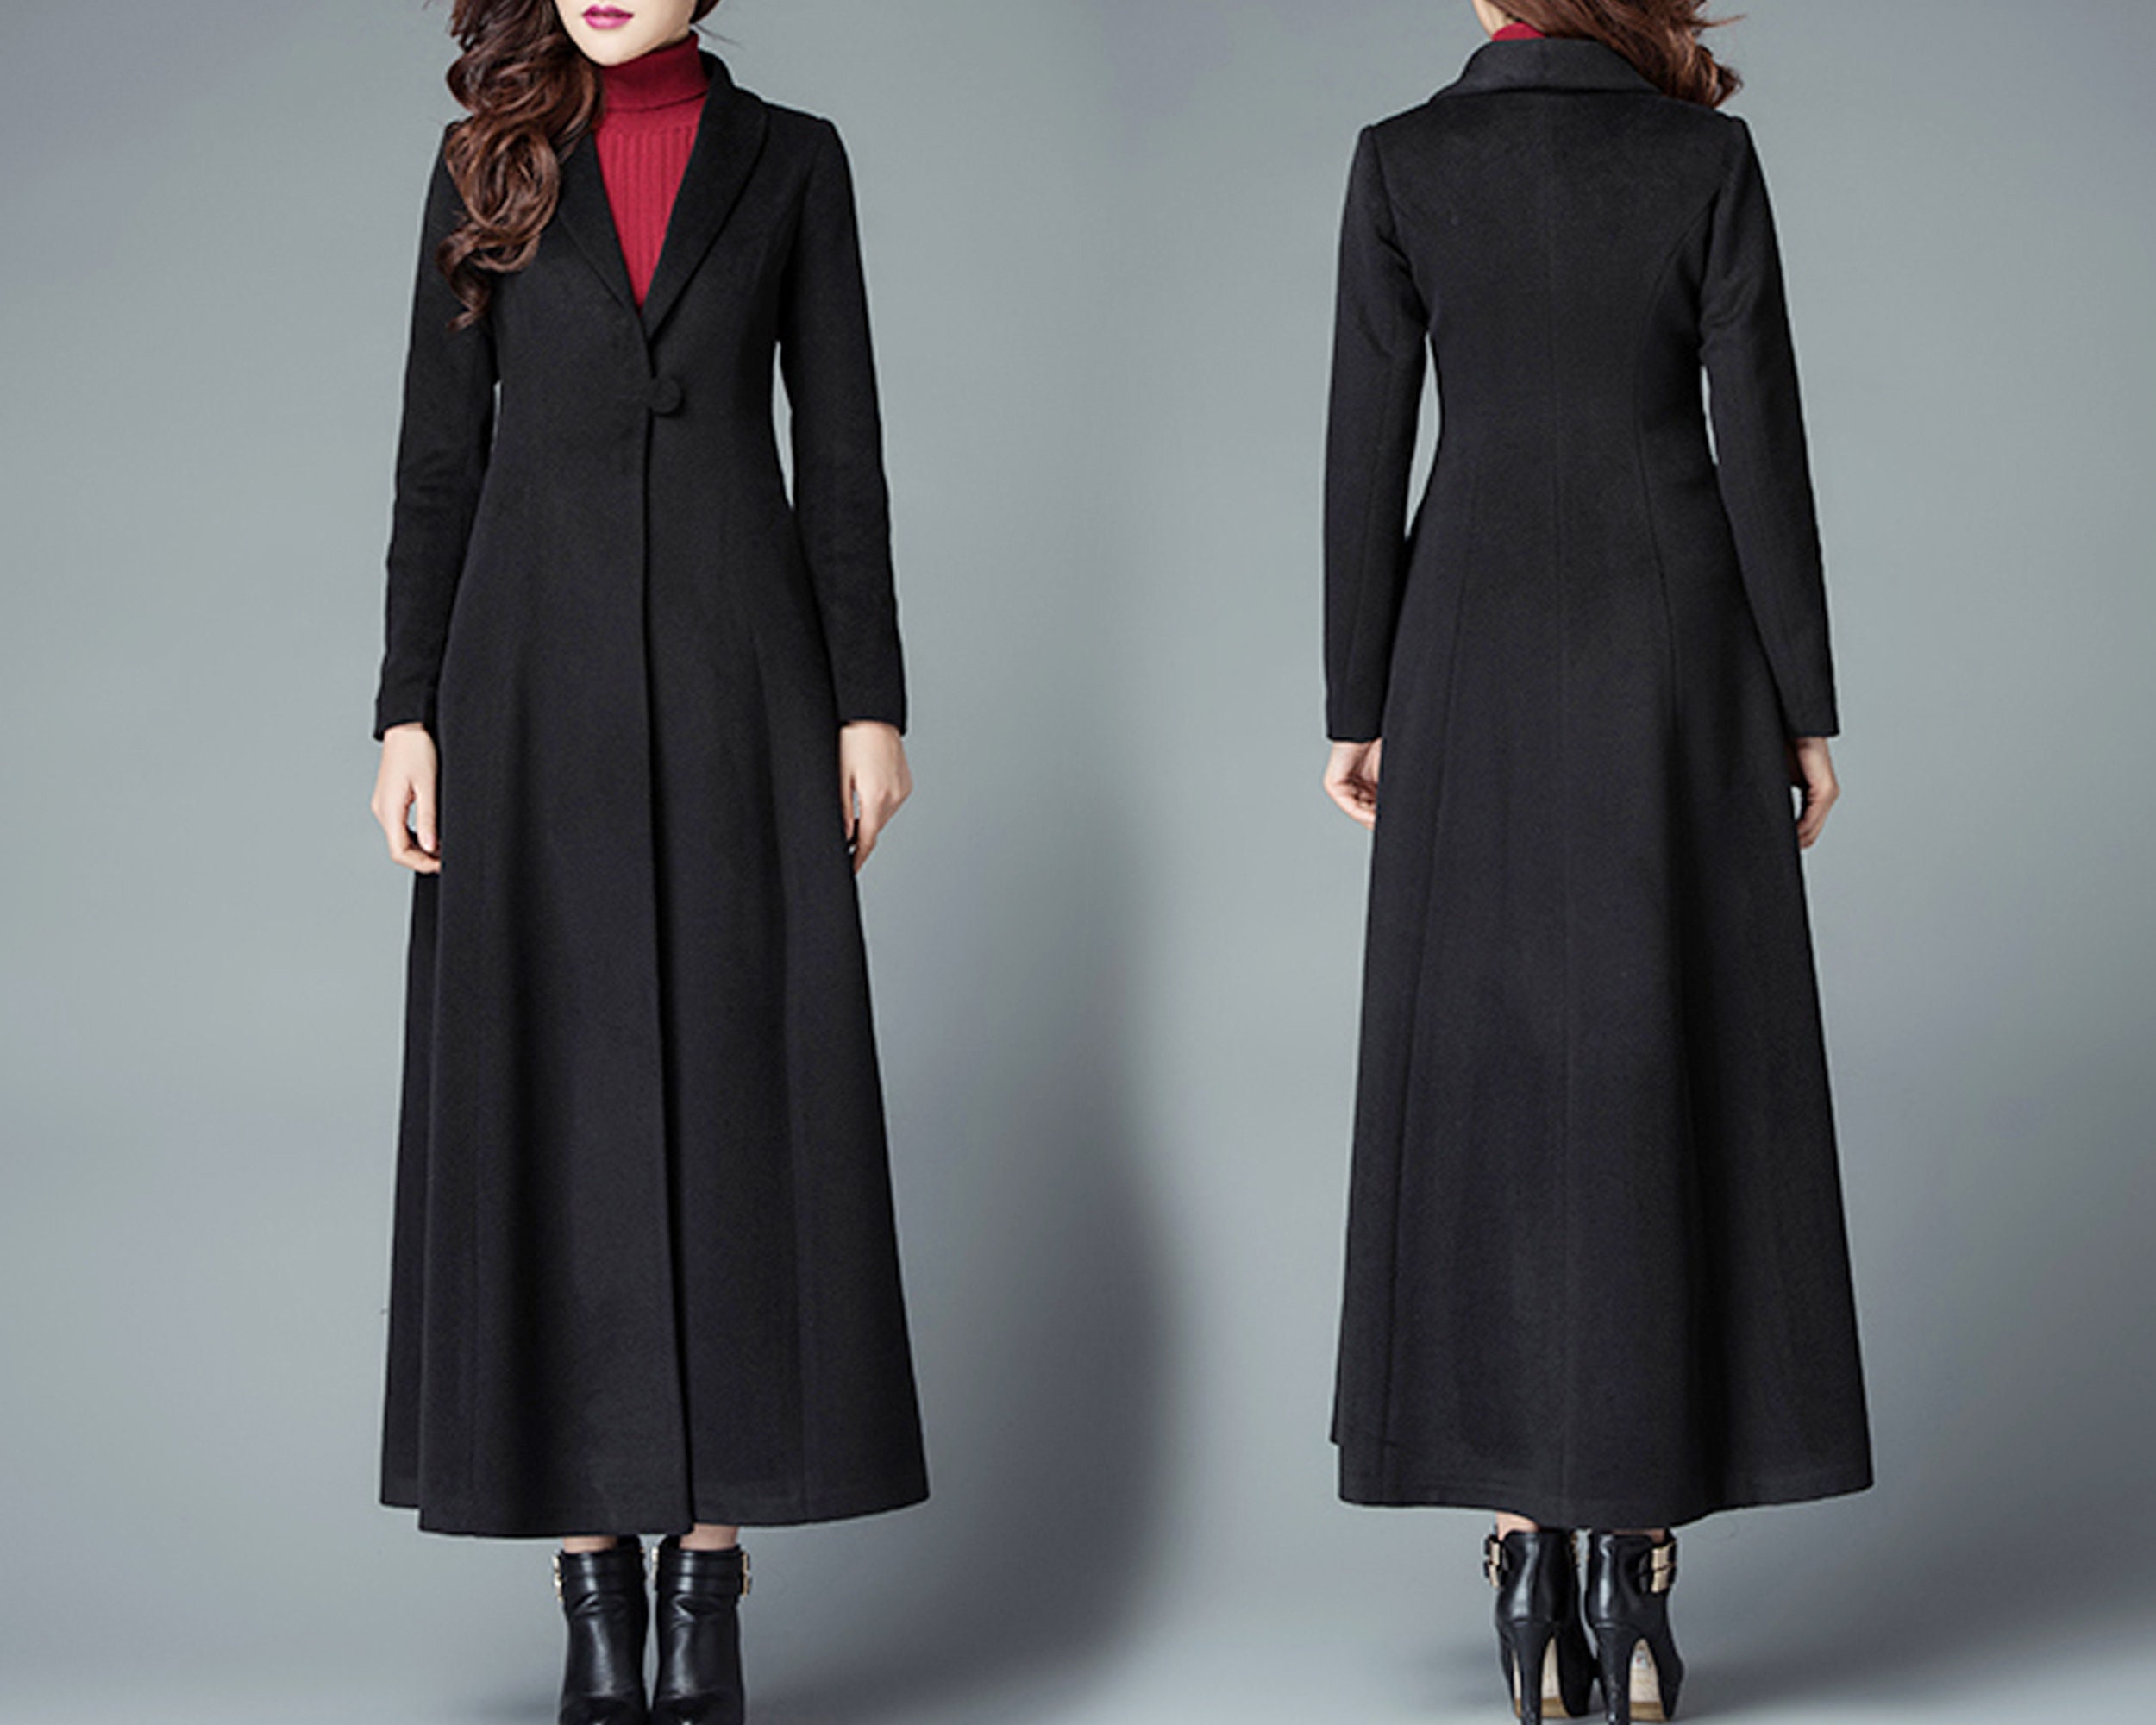 1950s Inspired Long Wool Coat Women, Fit and Flare Coat, Warm